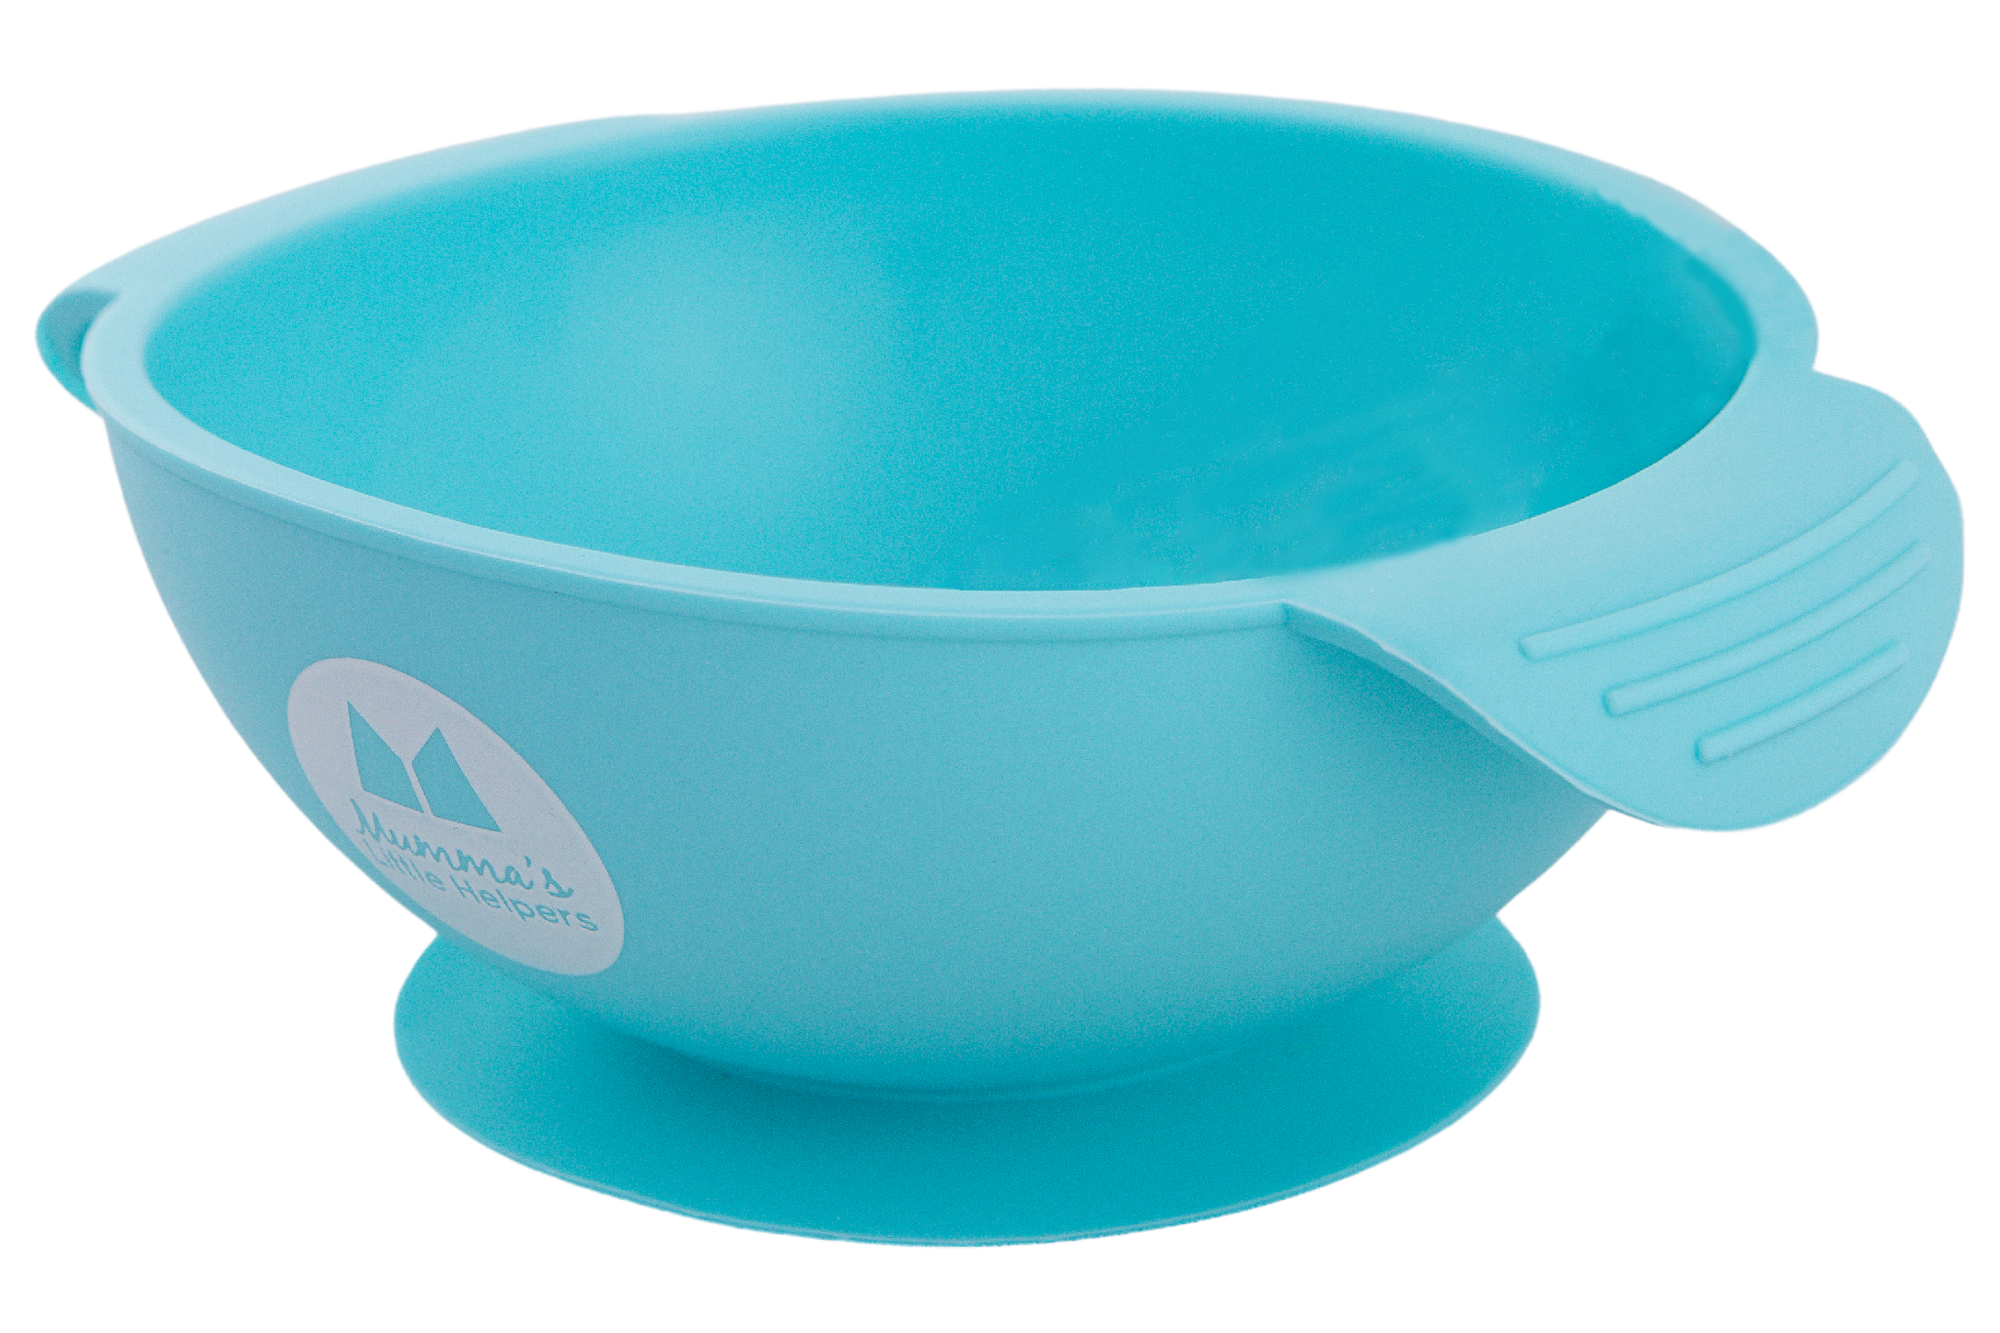 Baby Silicone Suction Bowls - Blue – Goobie Baby